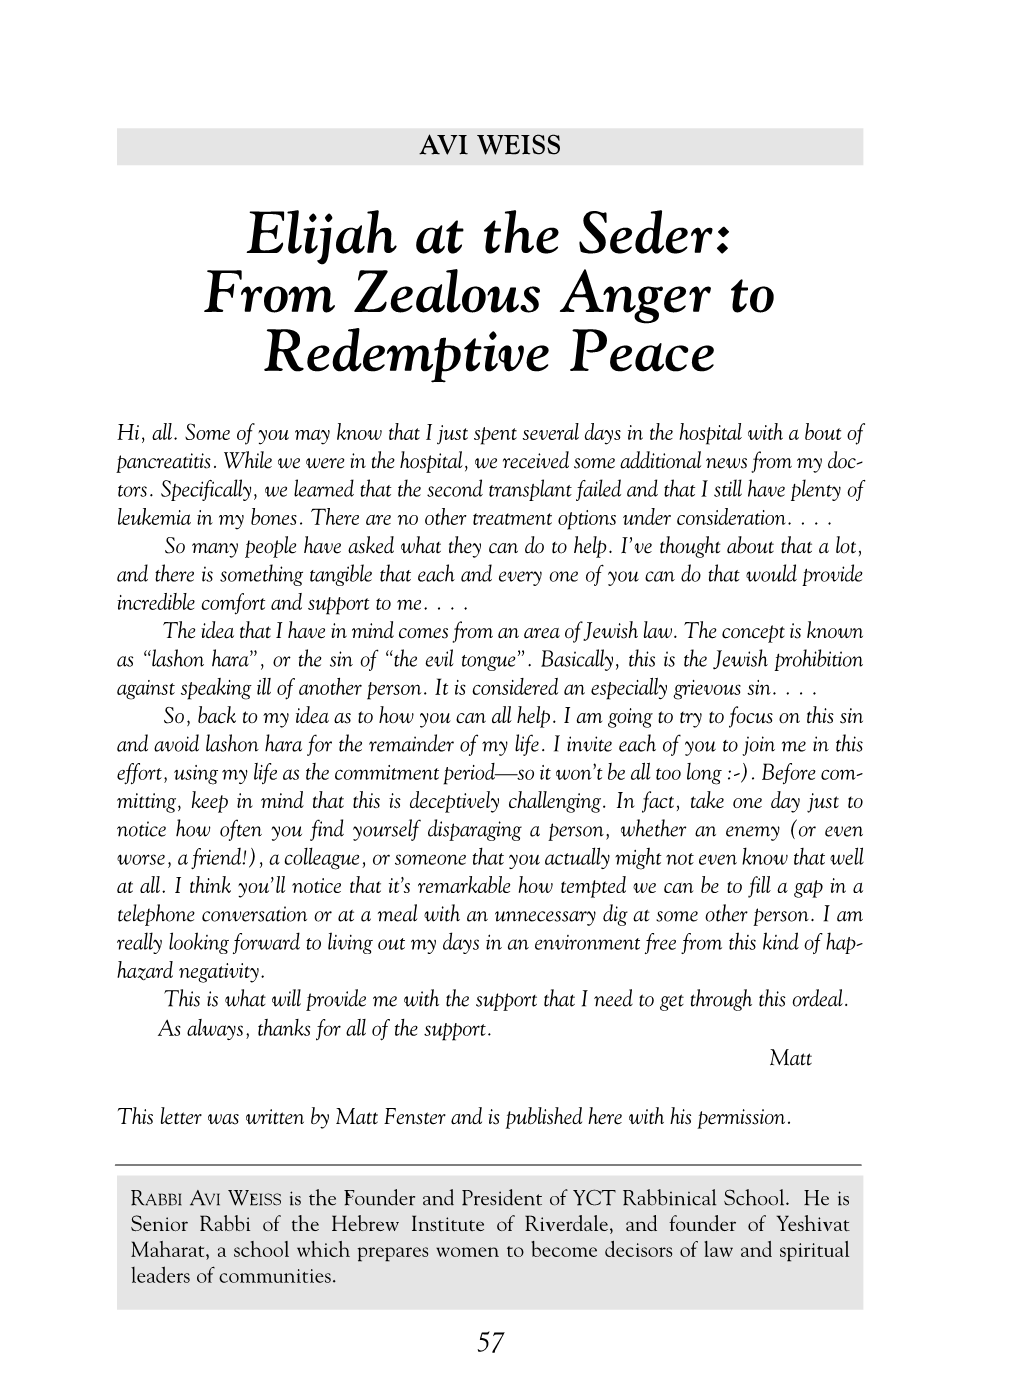 Elijah at the Seder: from Zealous Anger to Redemptive Peace